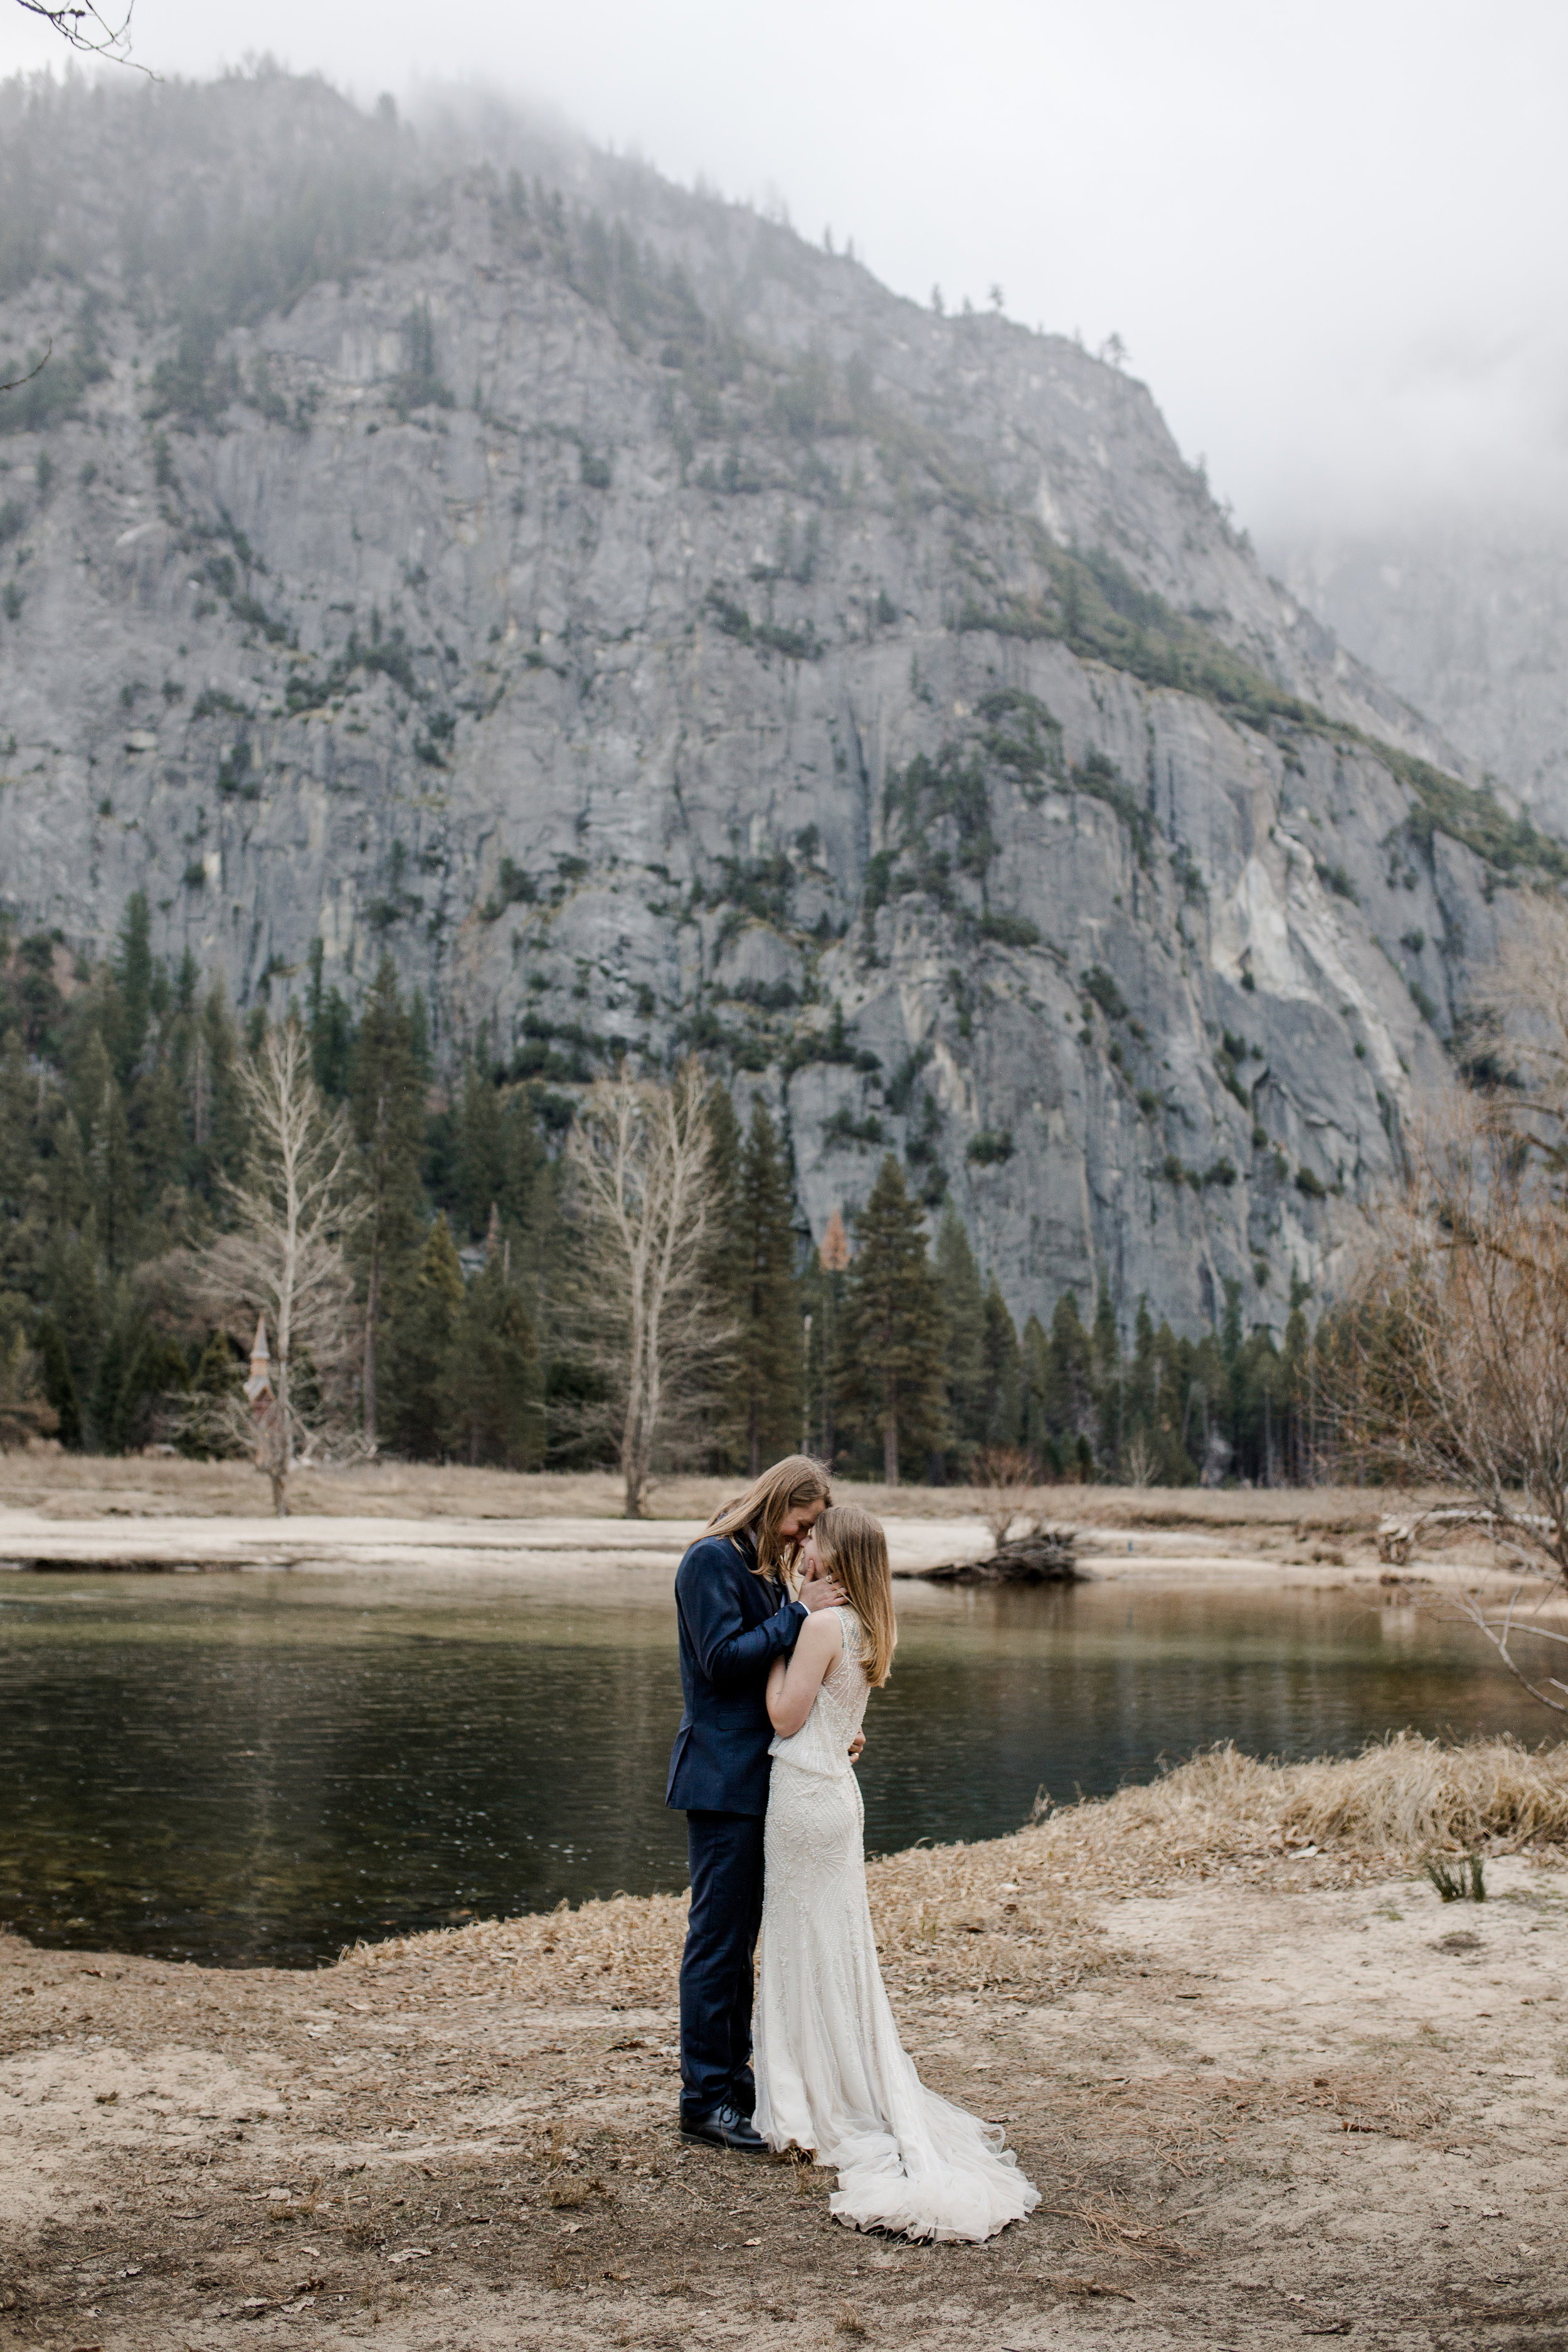 nicole-daacke-photography-yousemite-national-park-elopement-photographer-winter-cloud-moody-elope-inspiration-yosemite-valley-tunnel-view-winter-cloud-fog-weather-wedding-photos-31.jpg